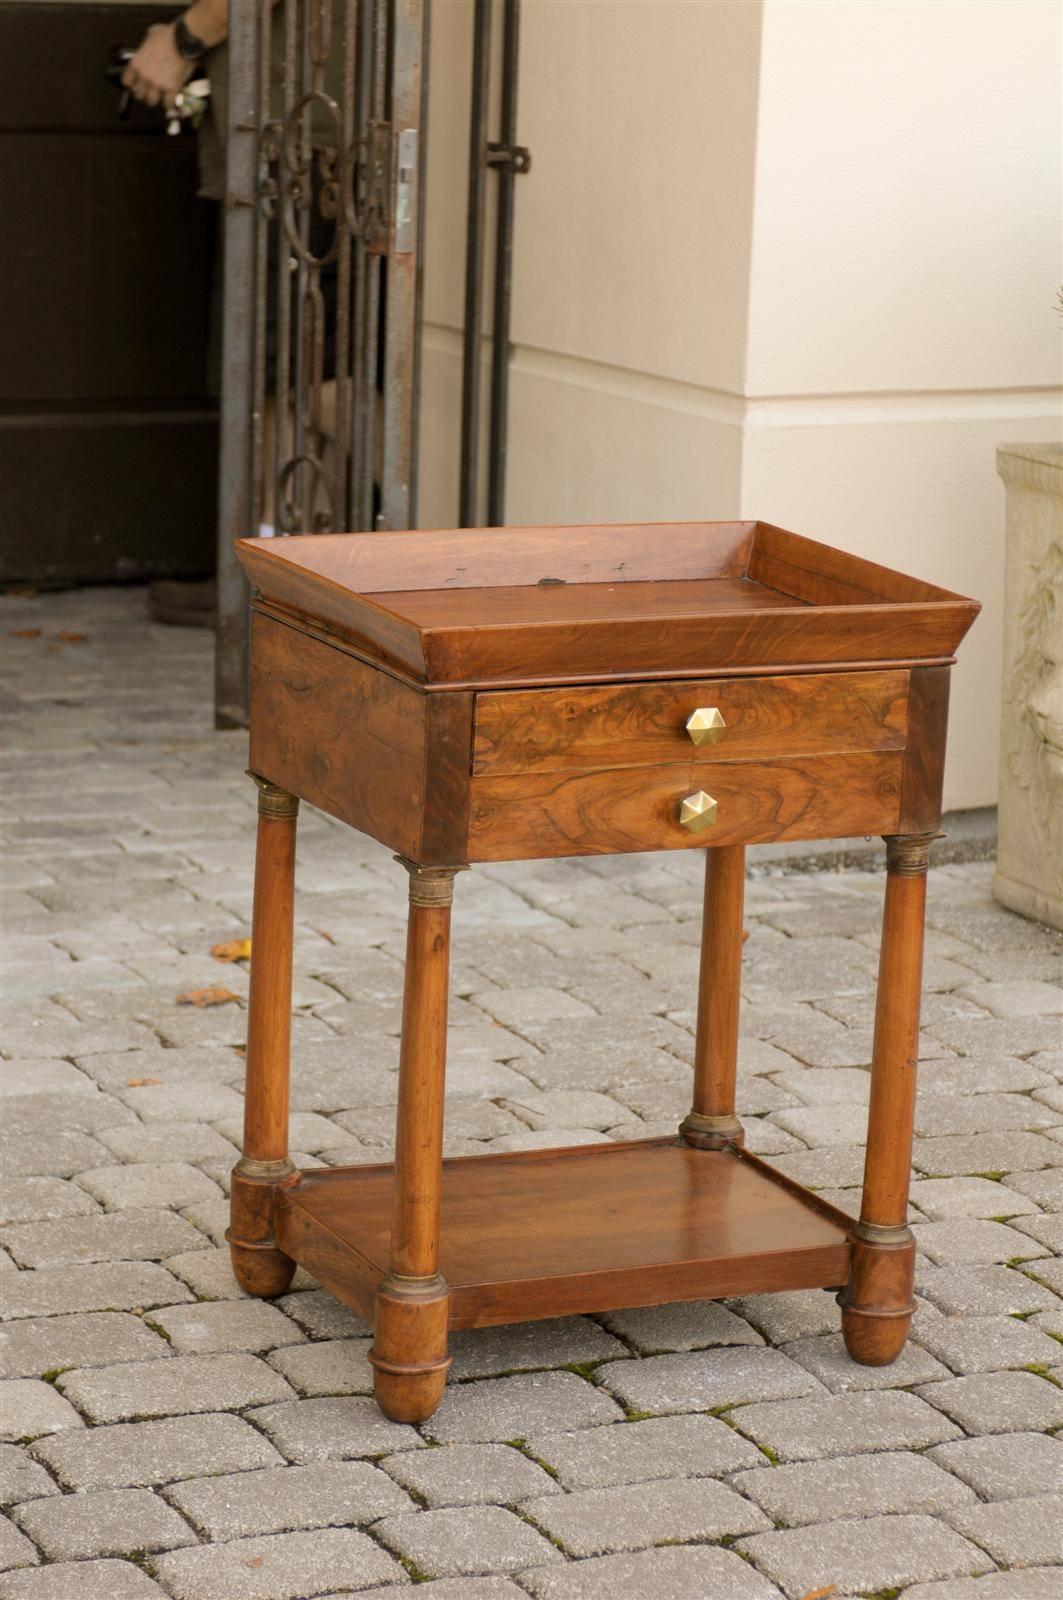 This French Empire walnut side table features a rectangular tray top over two thin drawers, one in the front and one in the back. To maintain a harmonious symmetry, the artist has ingeniously placed a faux drawer on each side to compliment the real